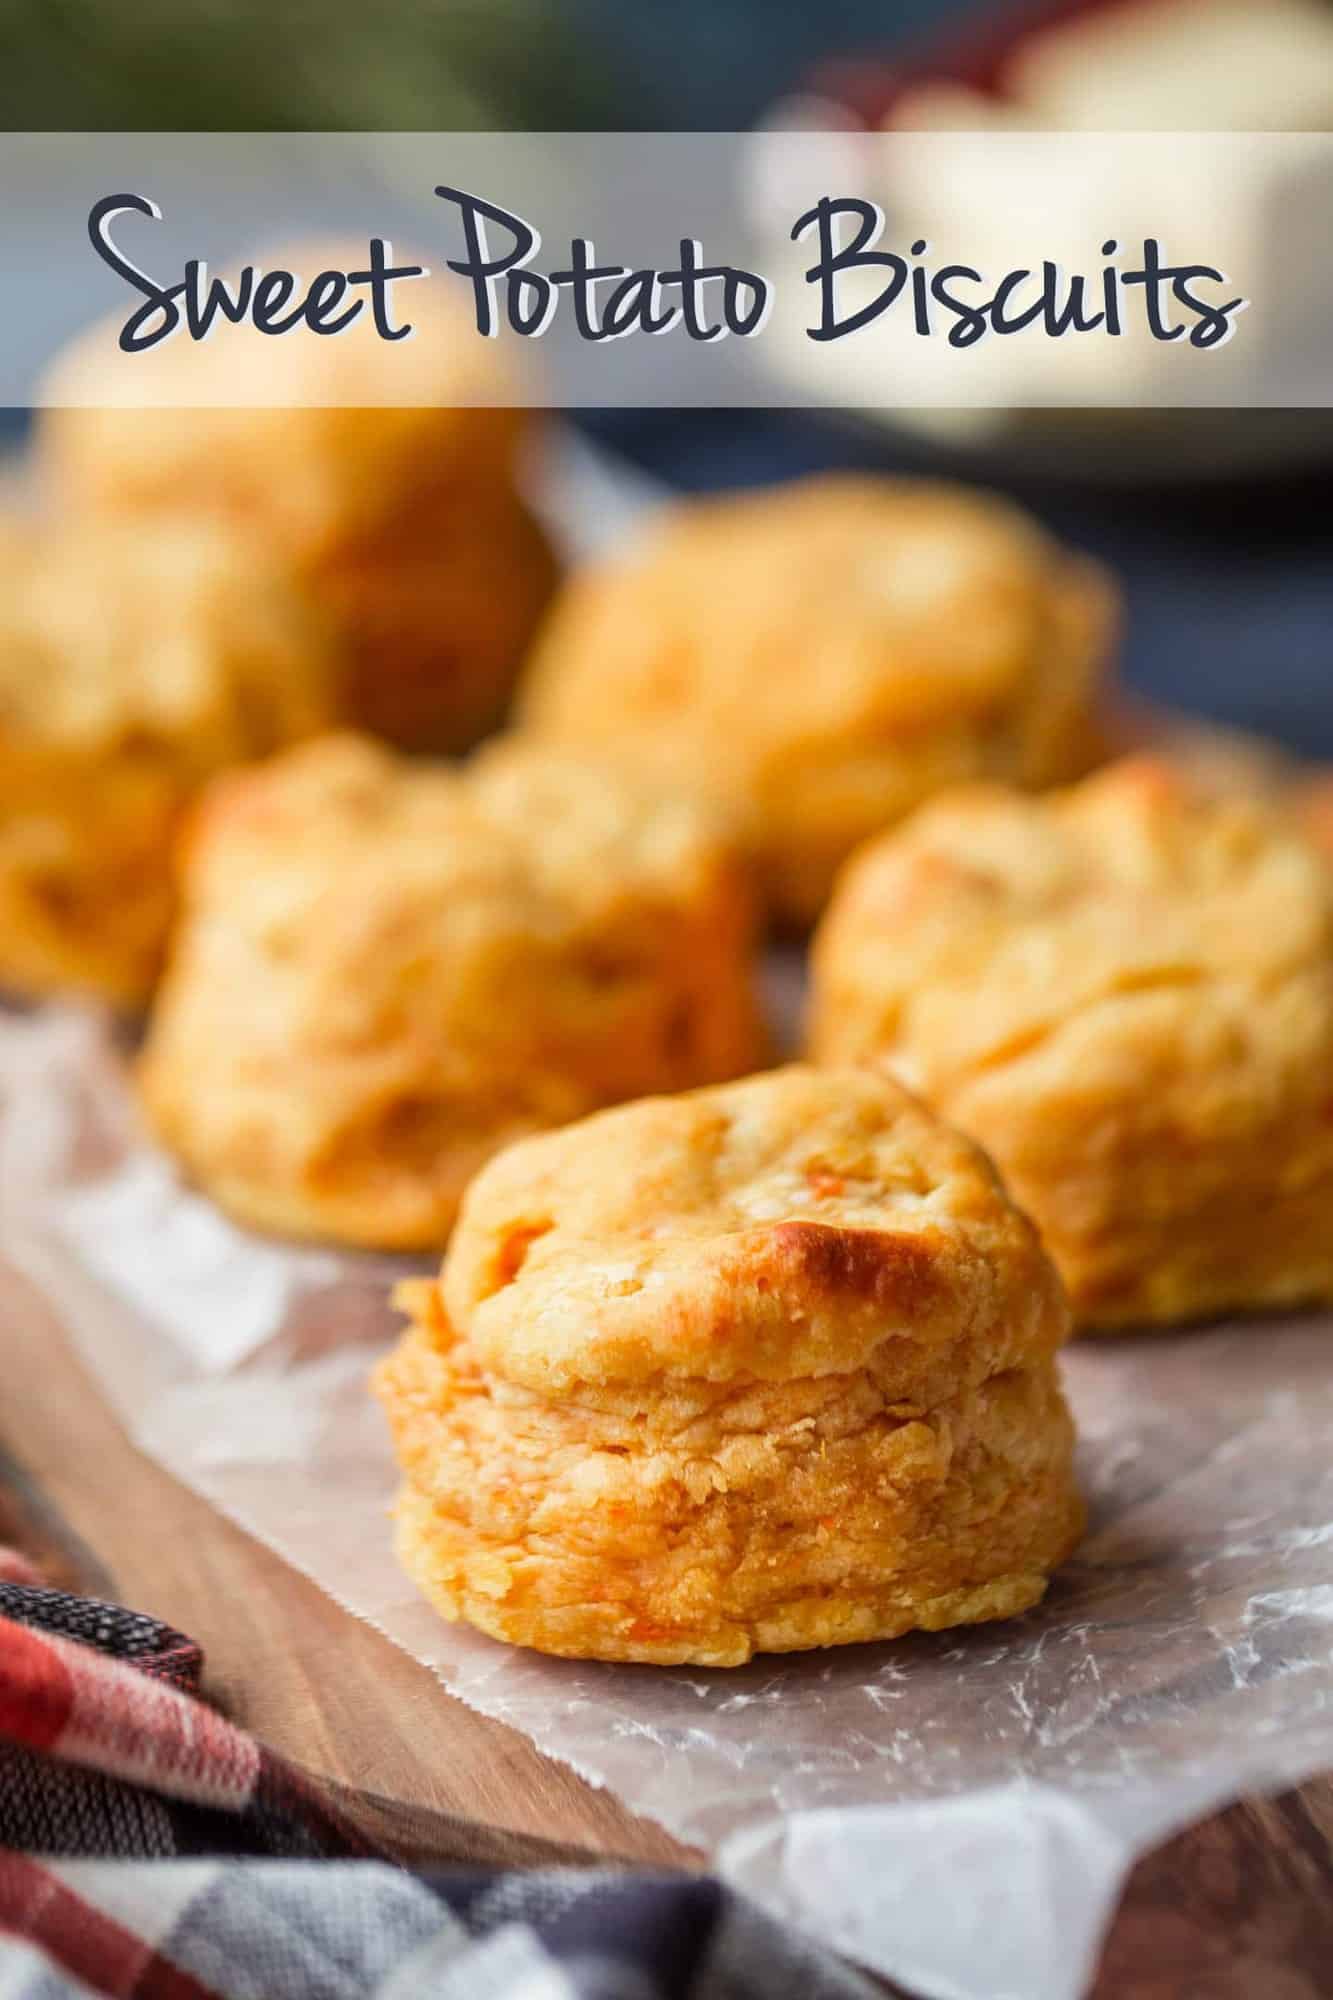 Sweet Potato Biscuits - Baking A Moment